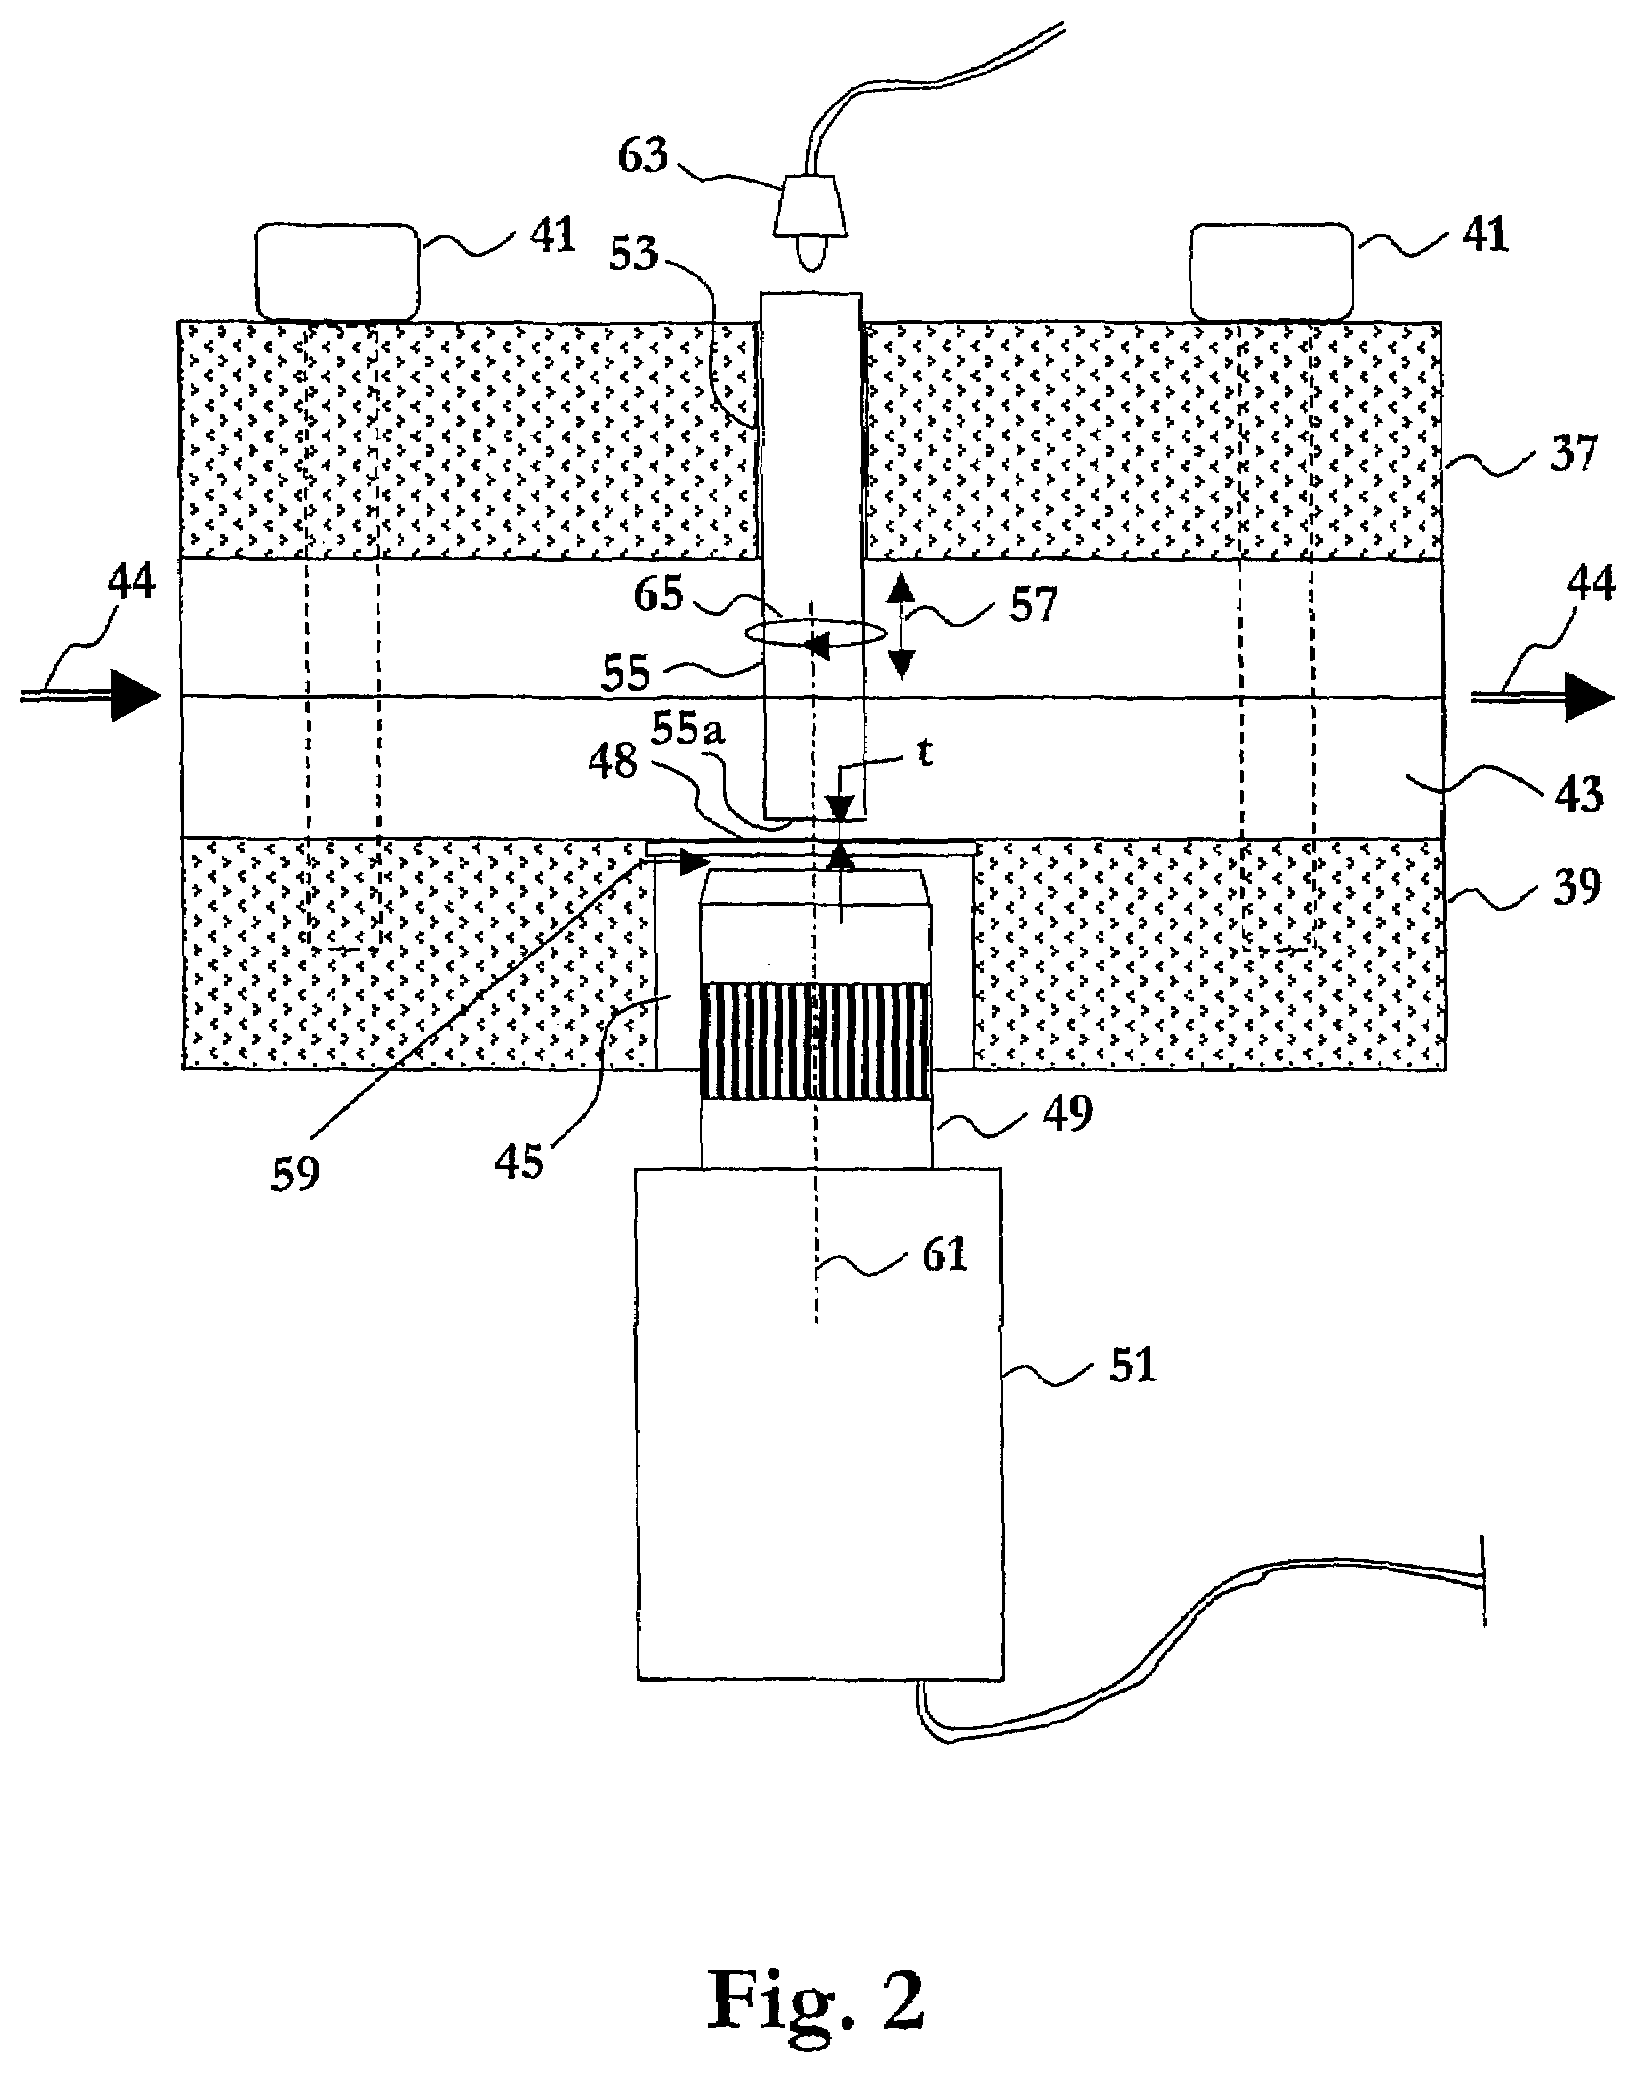 Method and apparatus for counting somatic cells or fat droplets in milk